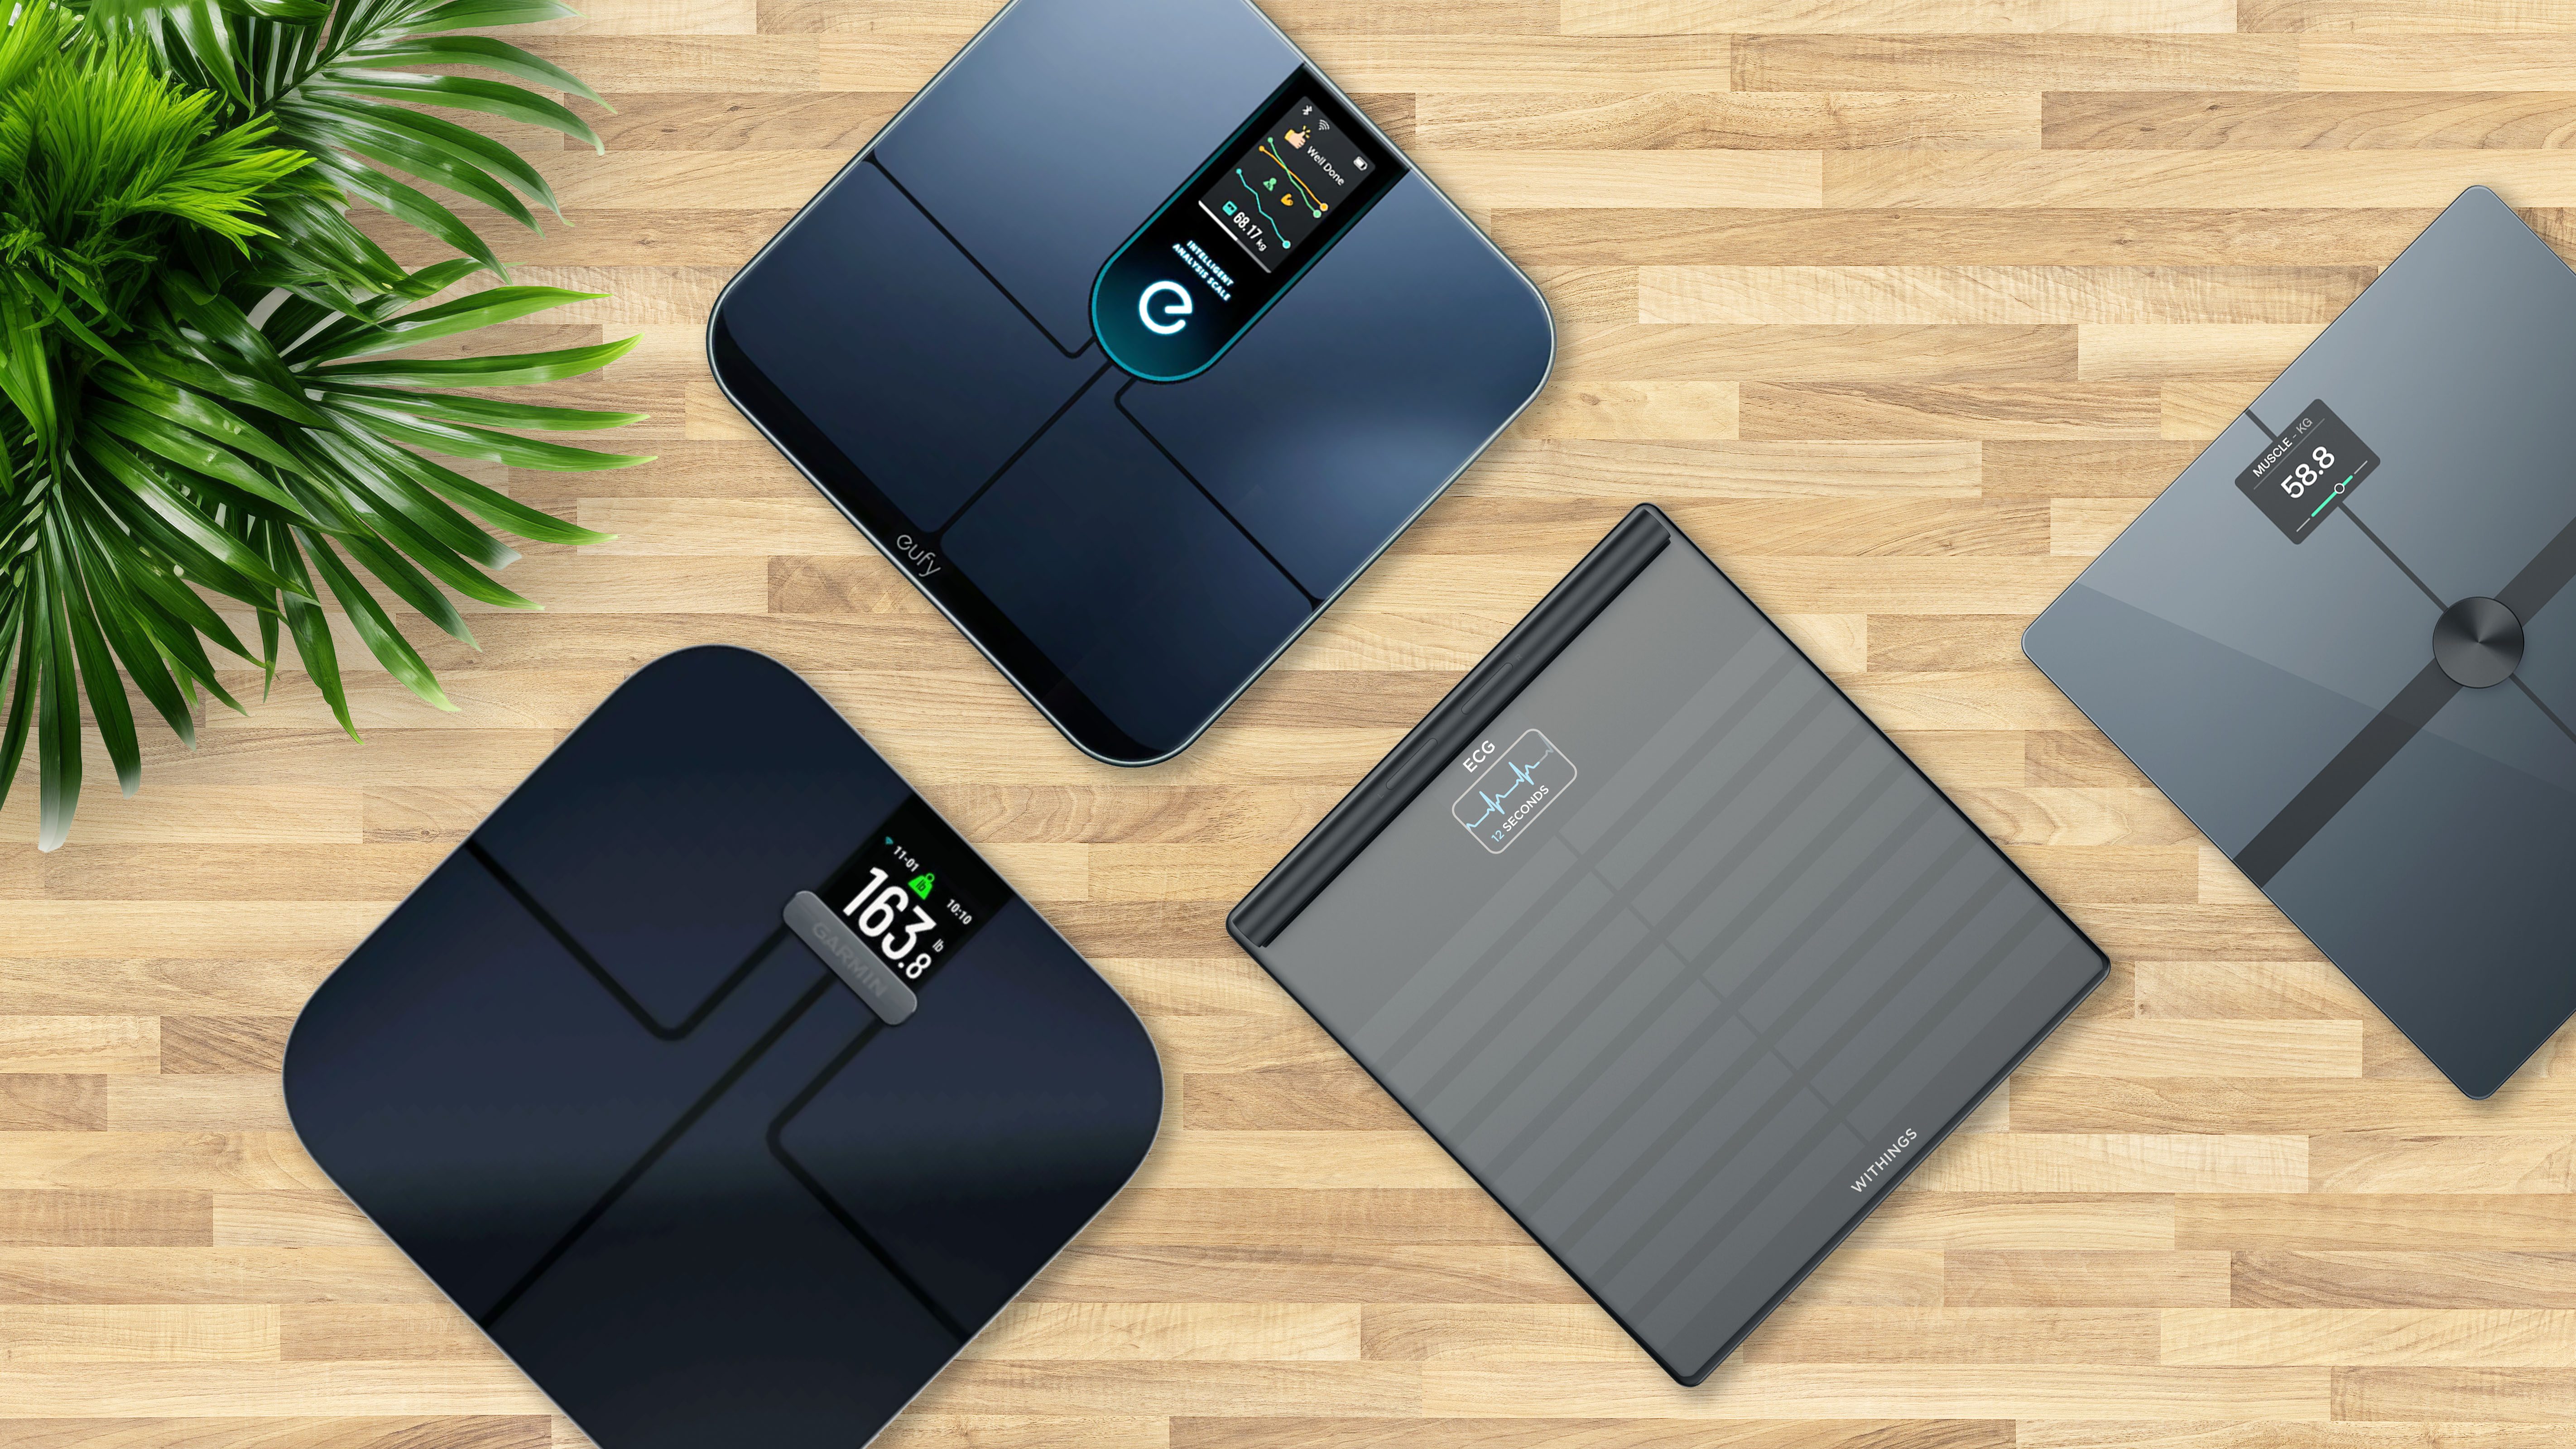 The Withings Body Scan smart scale measures ECG, body composition